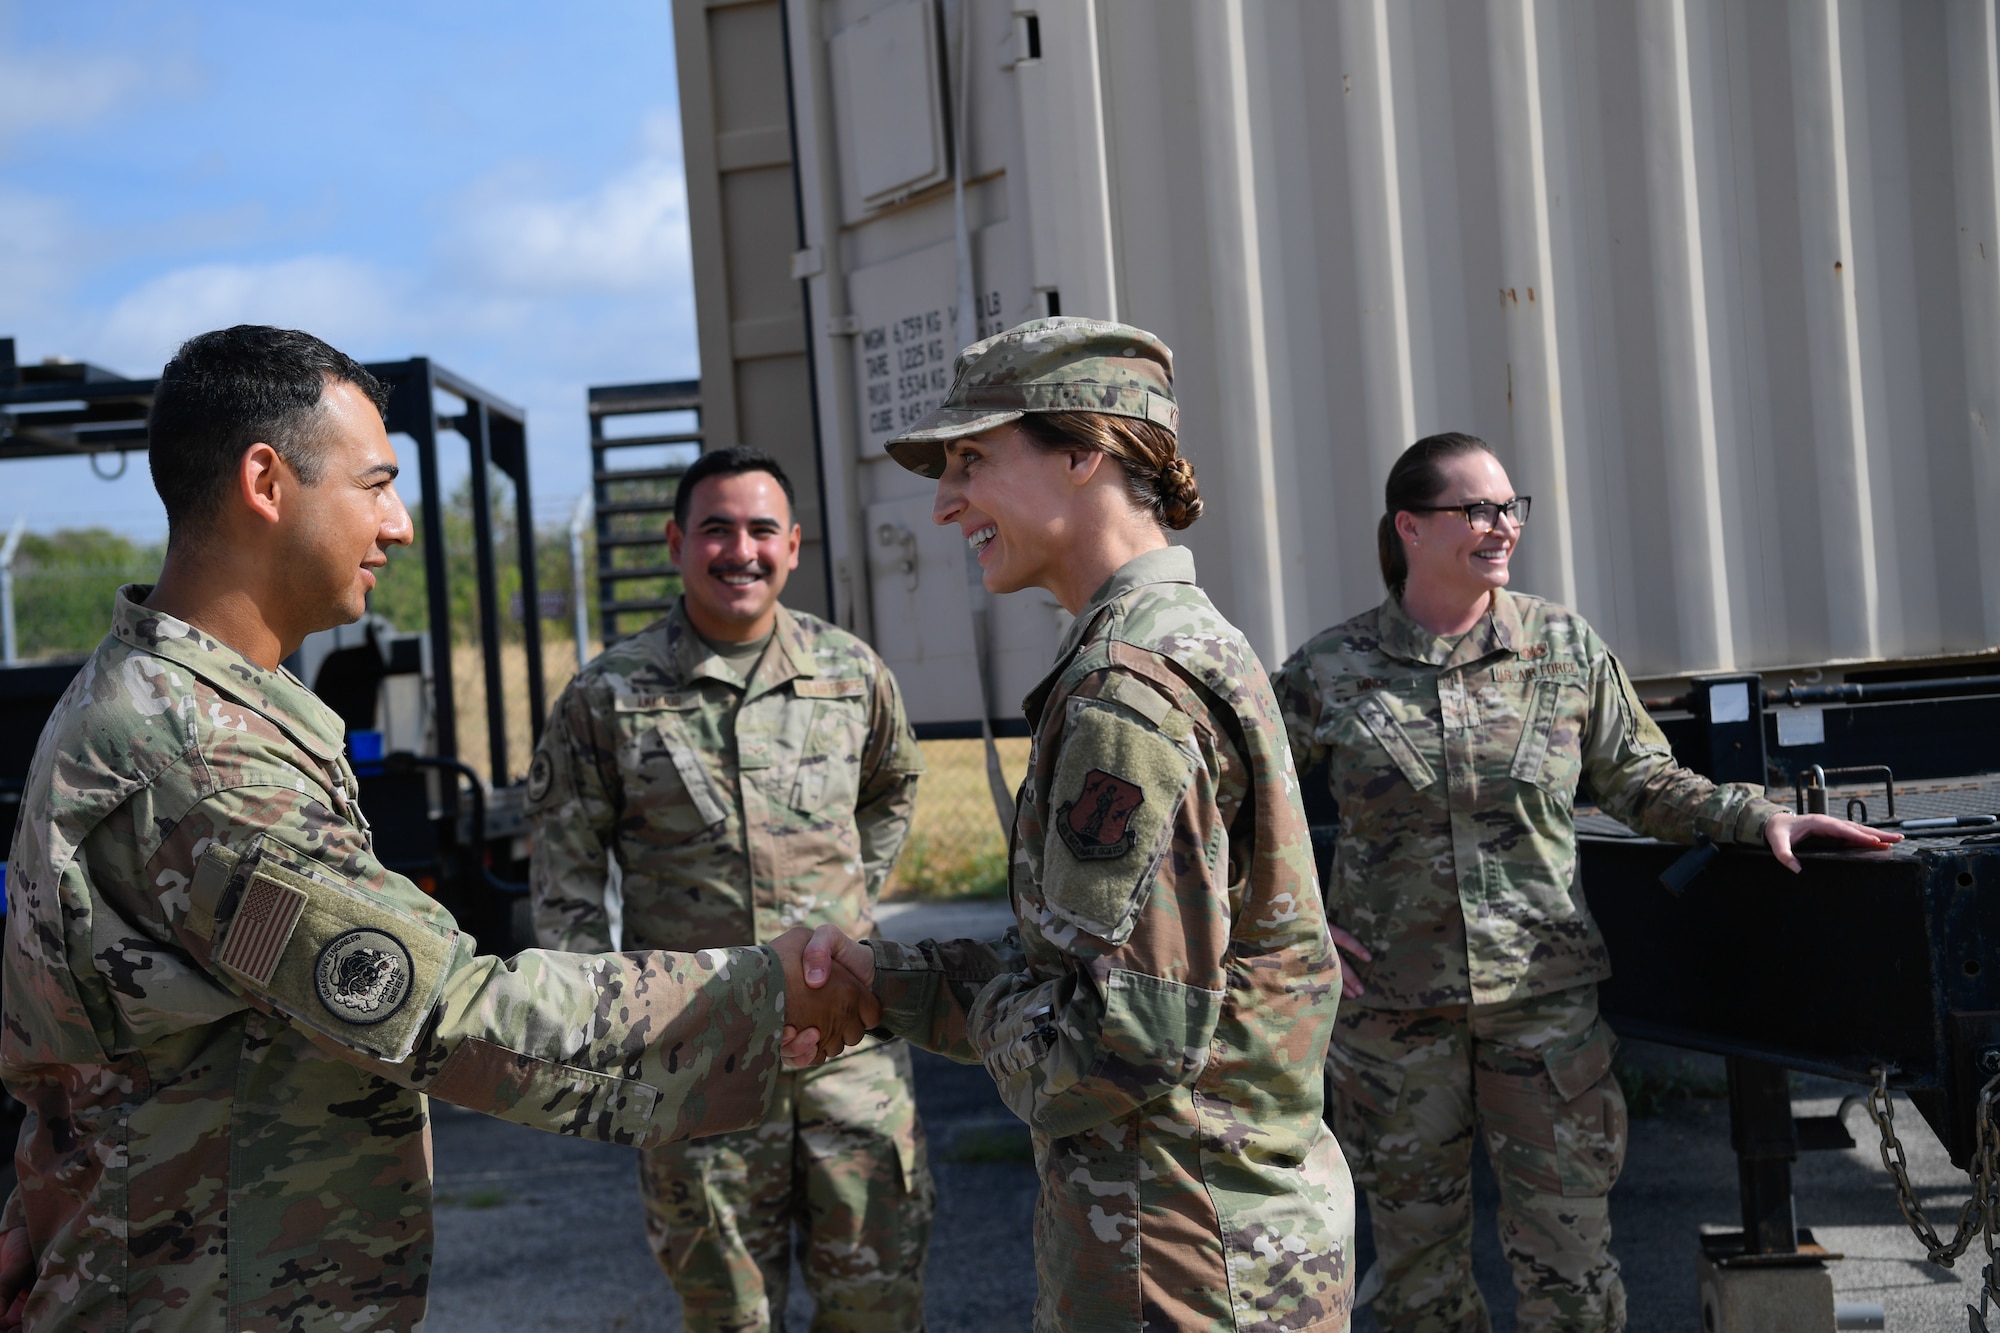 U.S. Air Force Col. Carol Kohtz, commander of the 149th Fighter Wing, meets with members